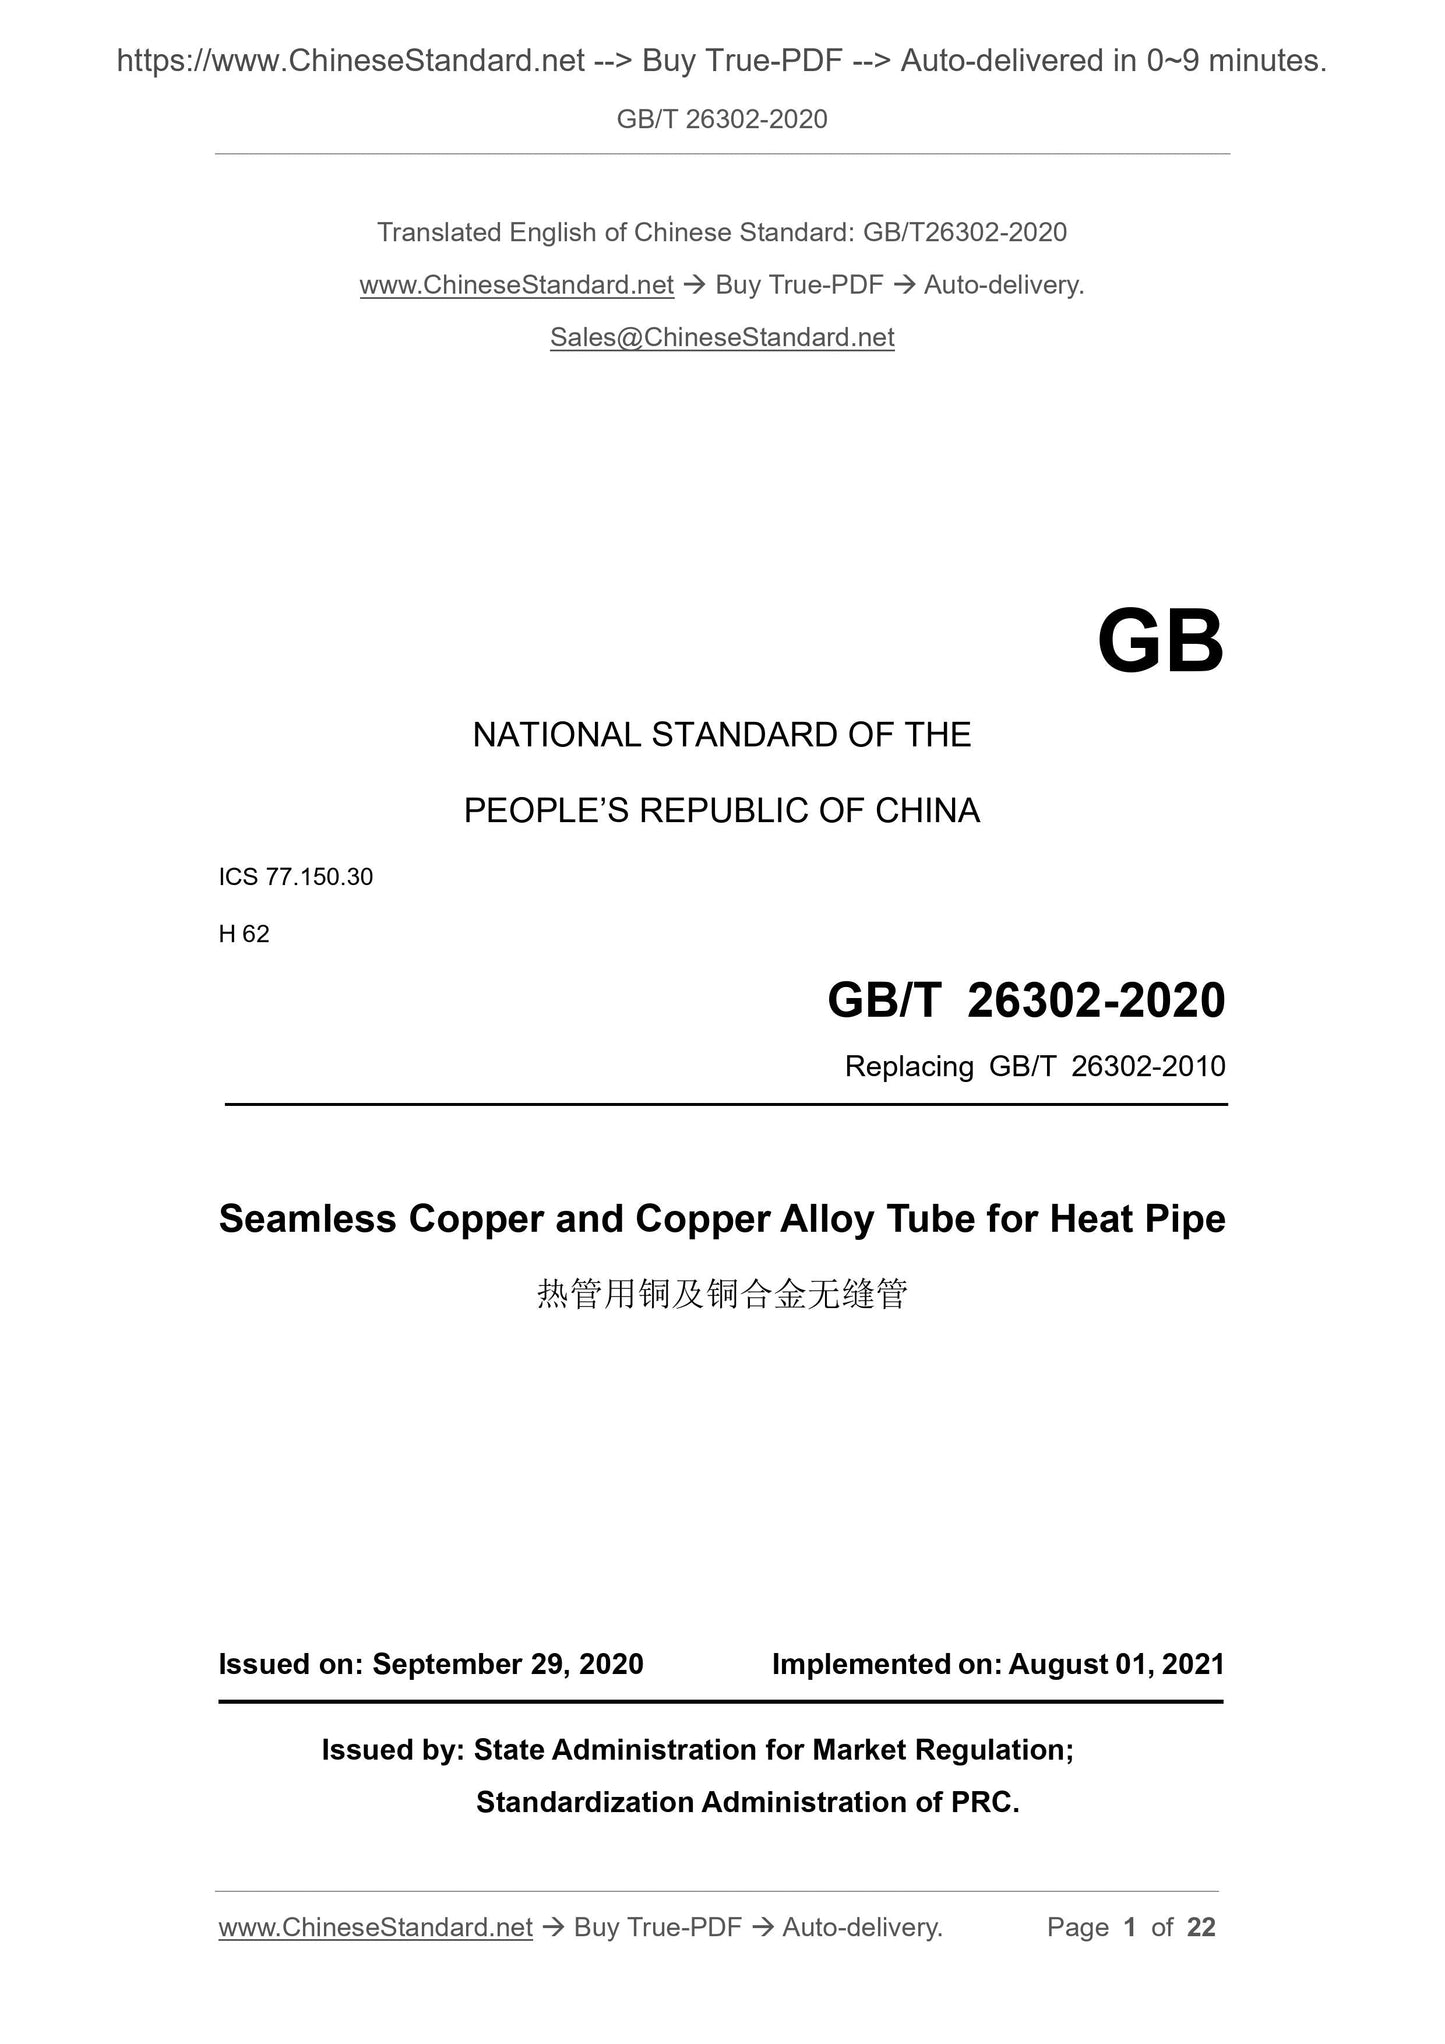 GB/T 26302-2020 Page 1